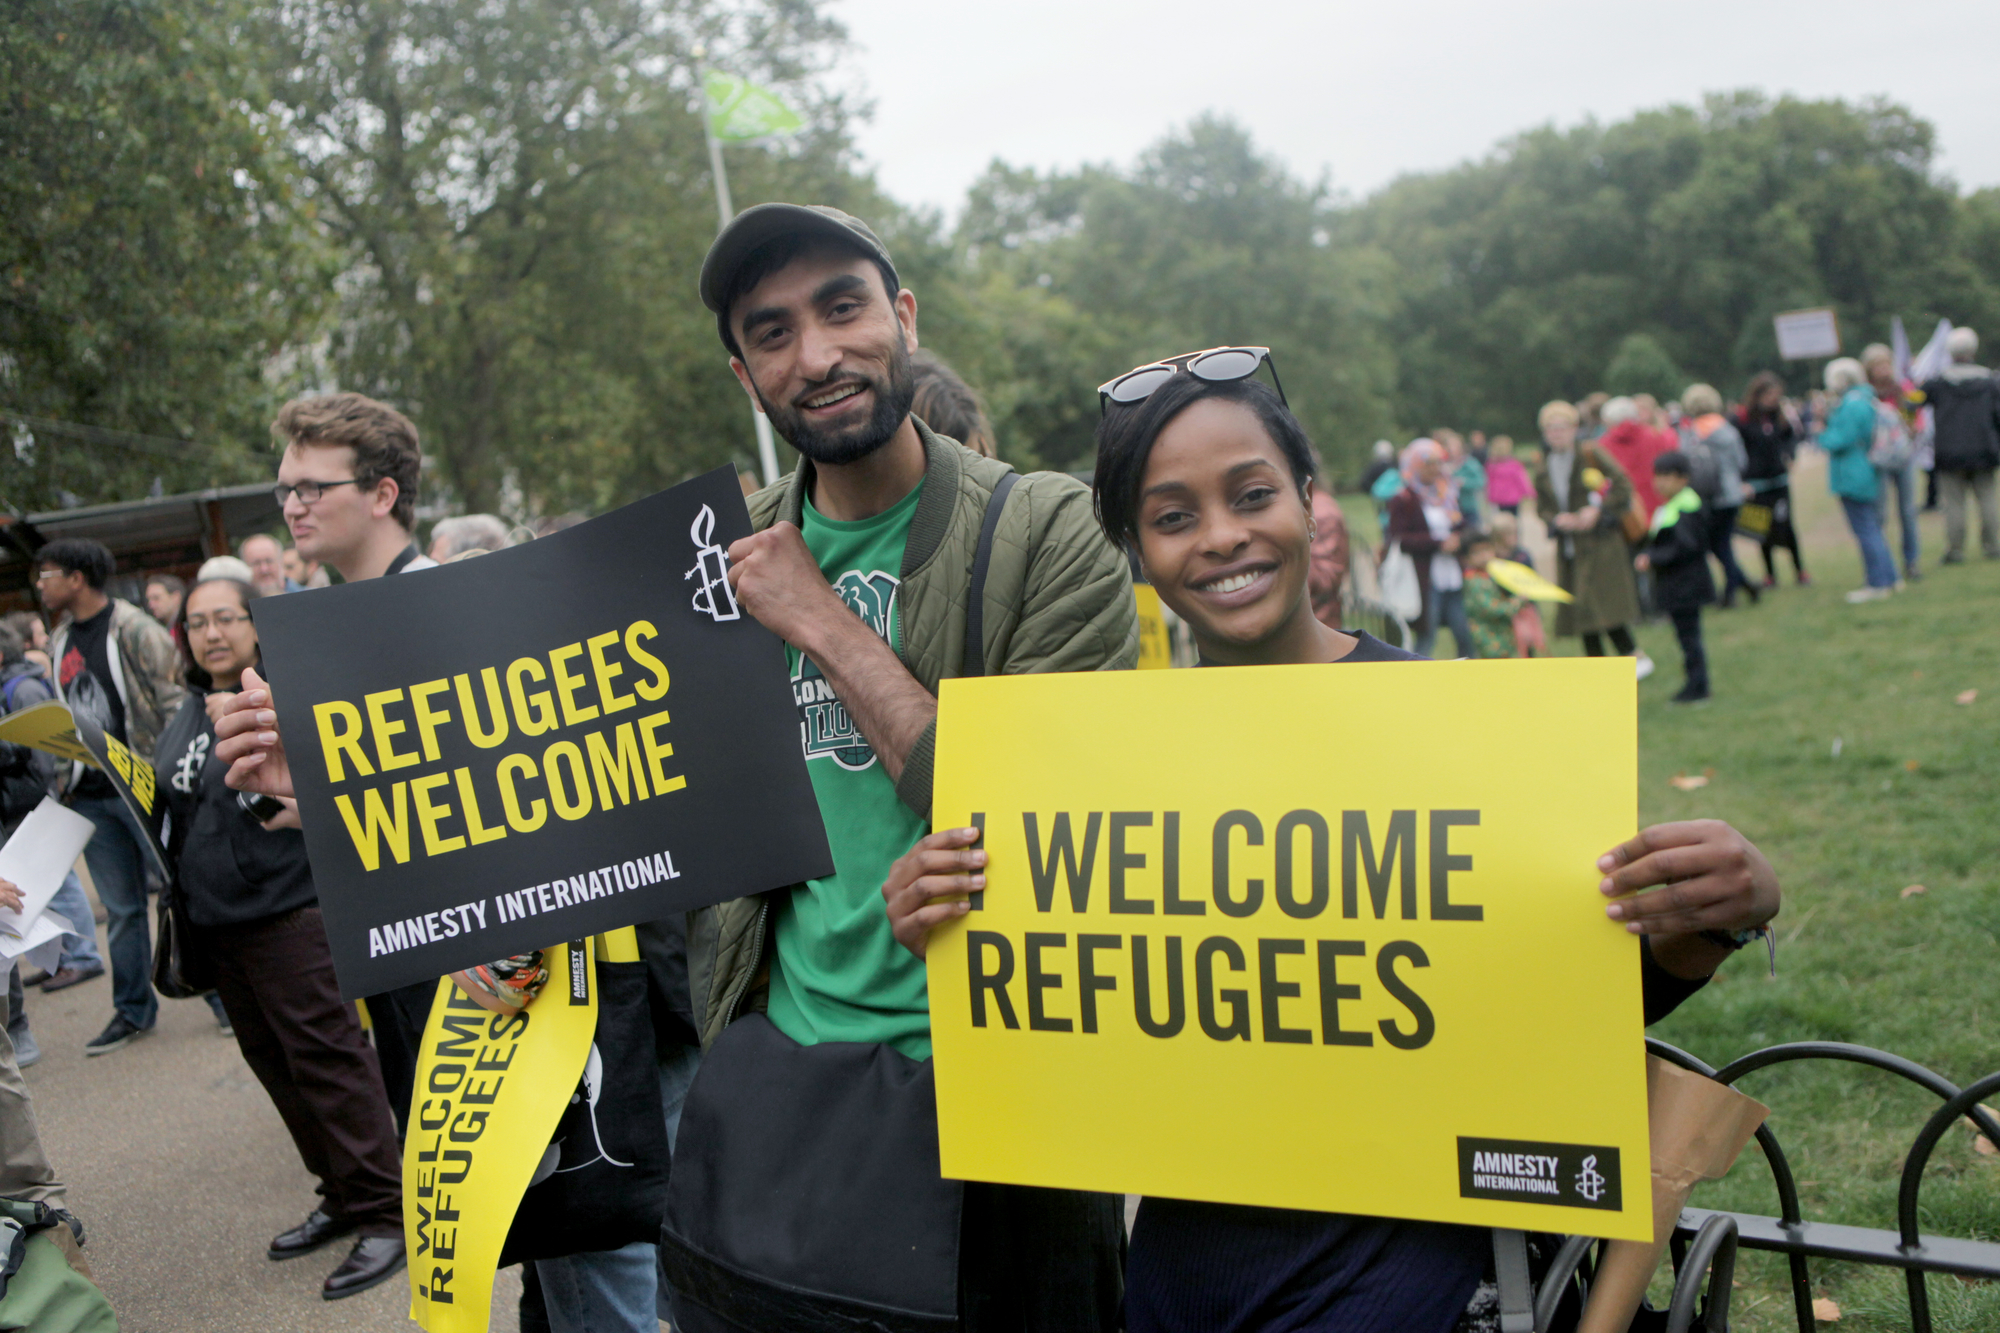 Governments completely out of touch with citizens on refugee issues, new survey reveals